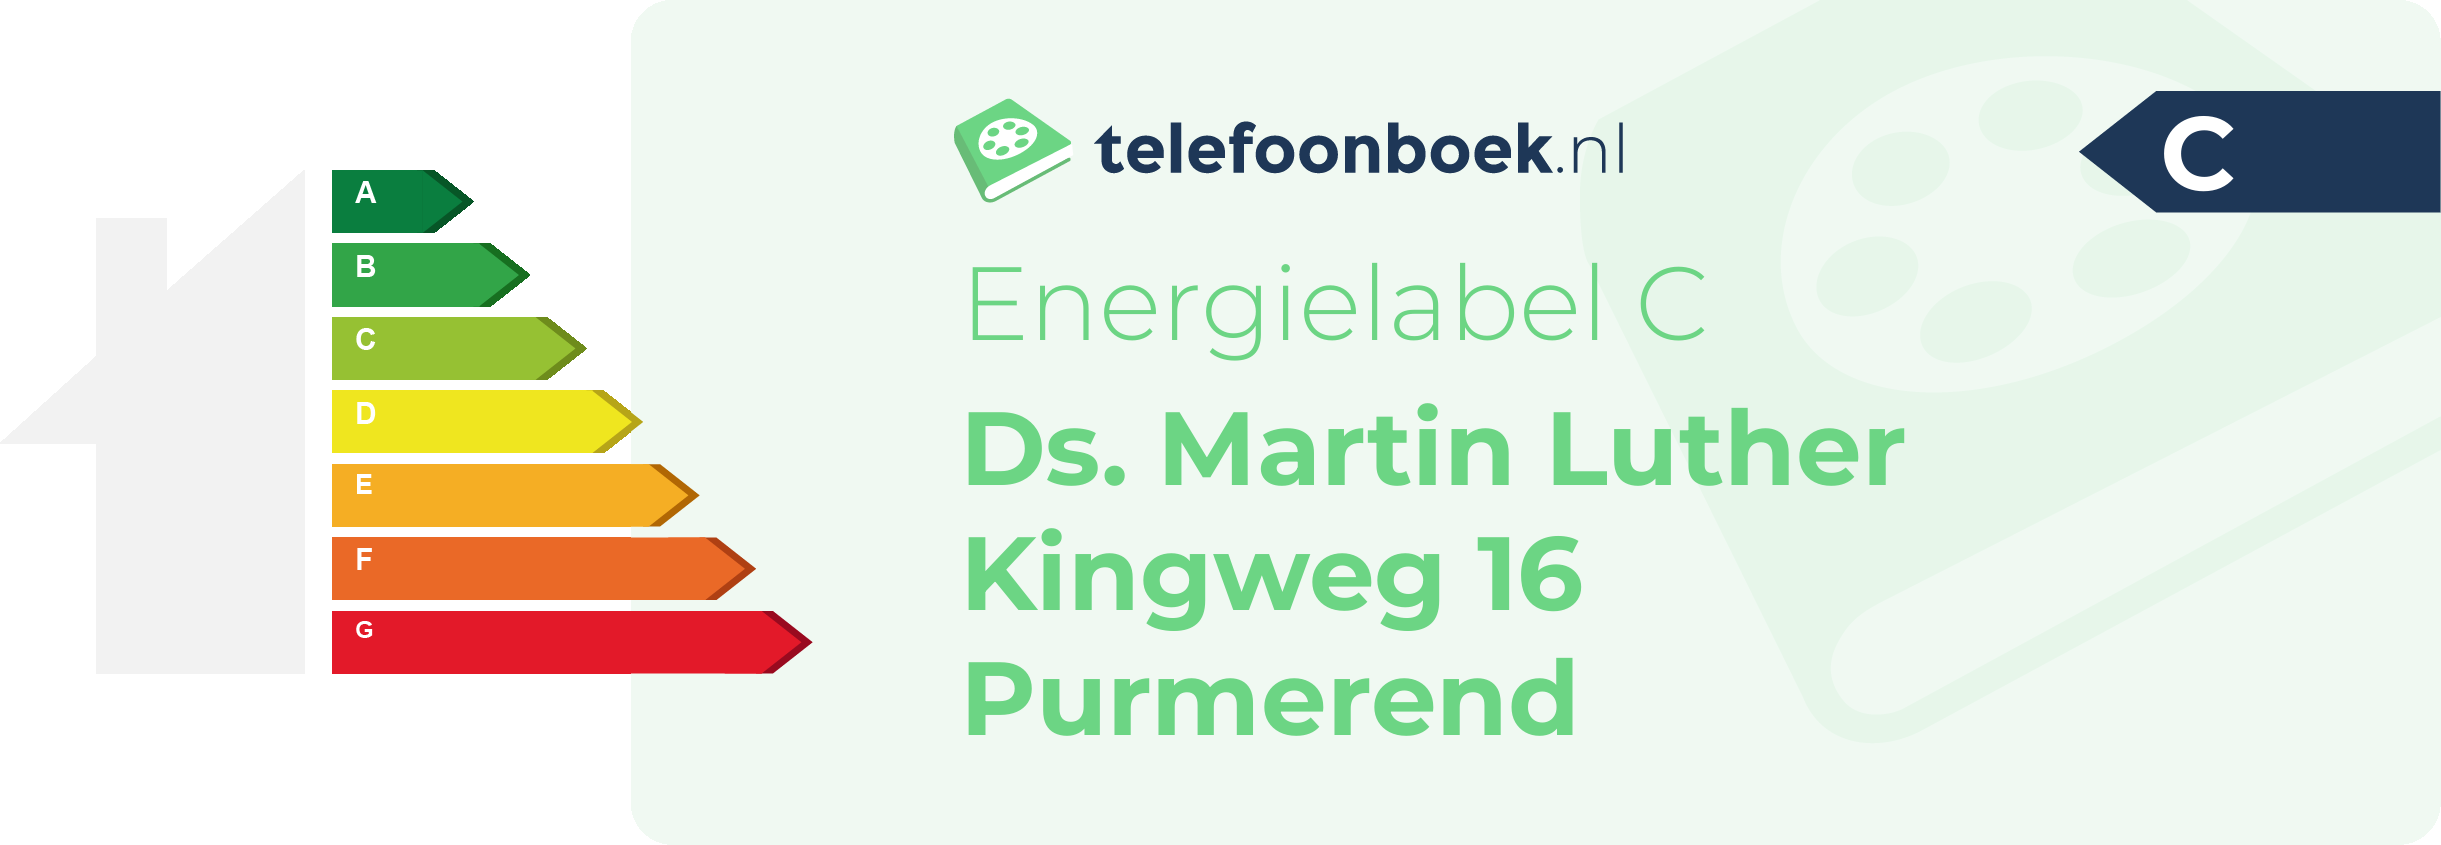 Energielabel Ds. Martin Luther Kingweg 16 Purmerend